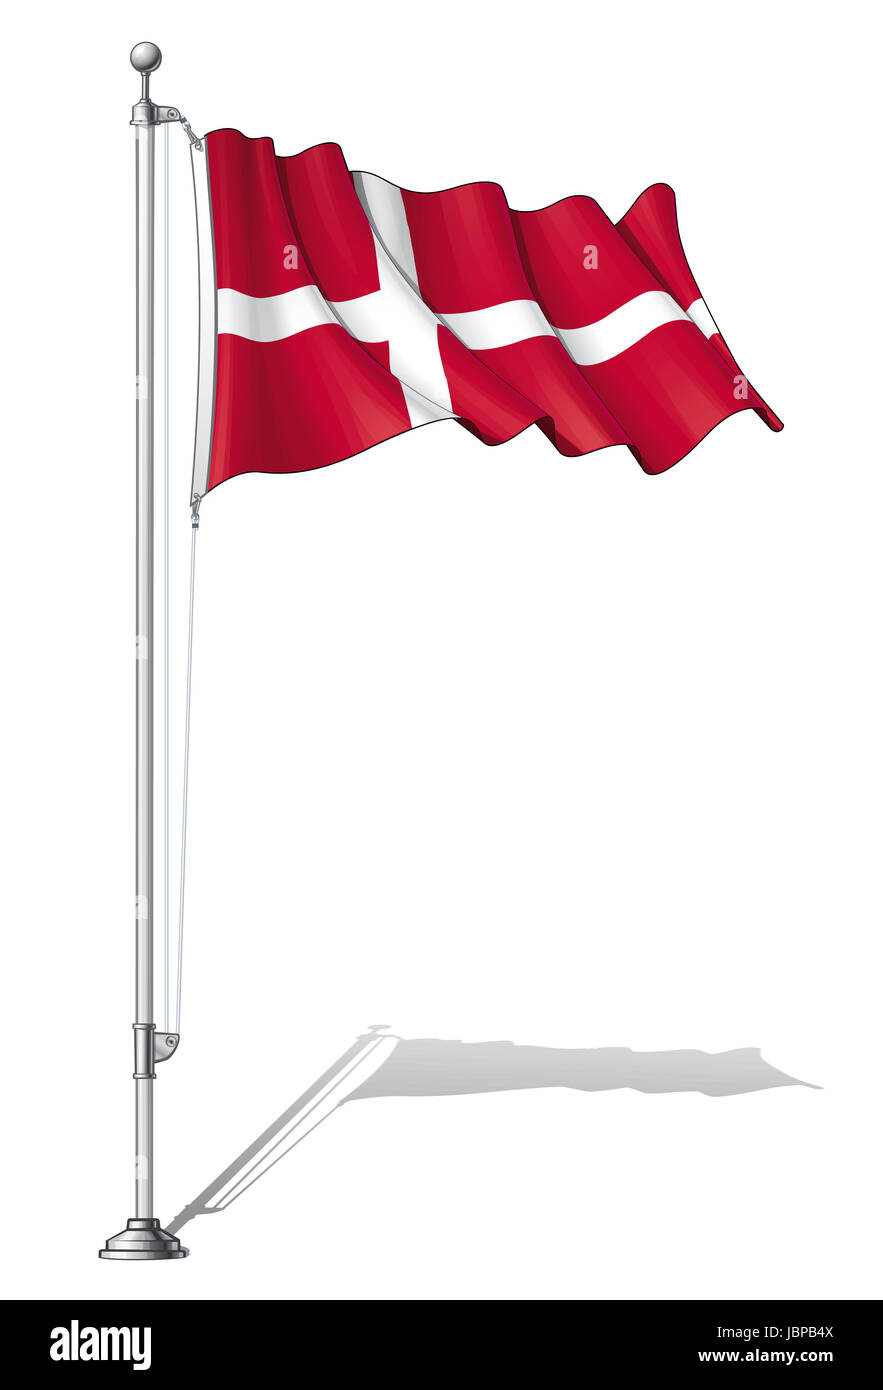 Vector Illustration of a waving Danish flag fasten on a flag pole. Flag and pole in separate layers, line art, shading and color neatly in groups for easy editing. Stock Photo